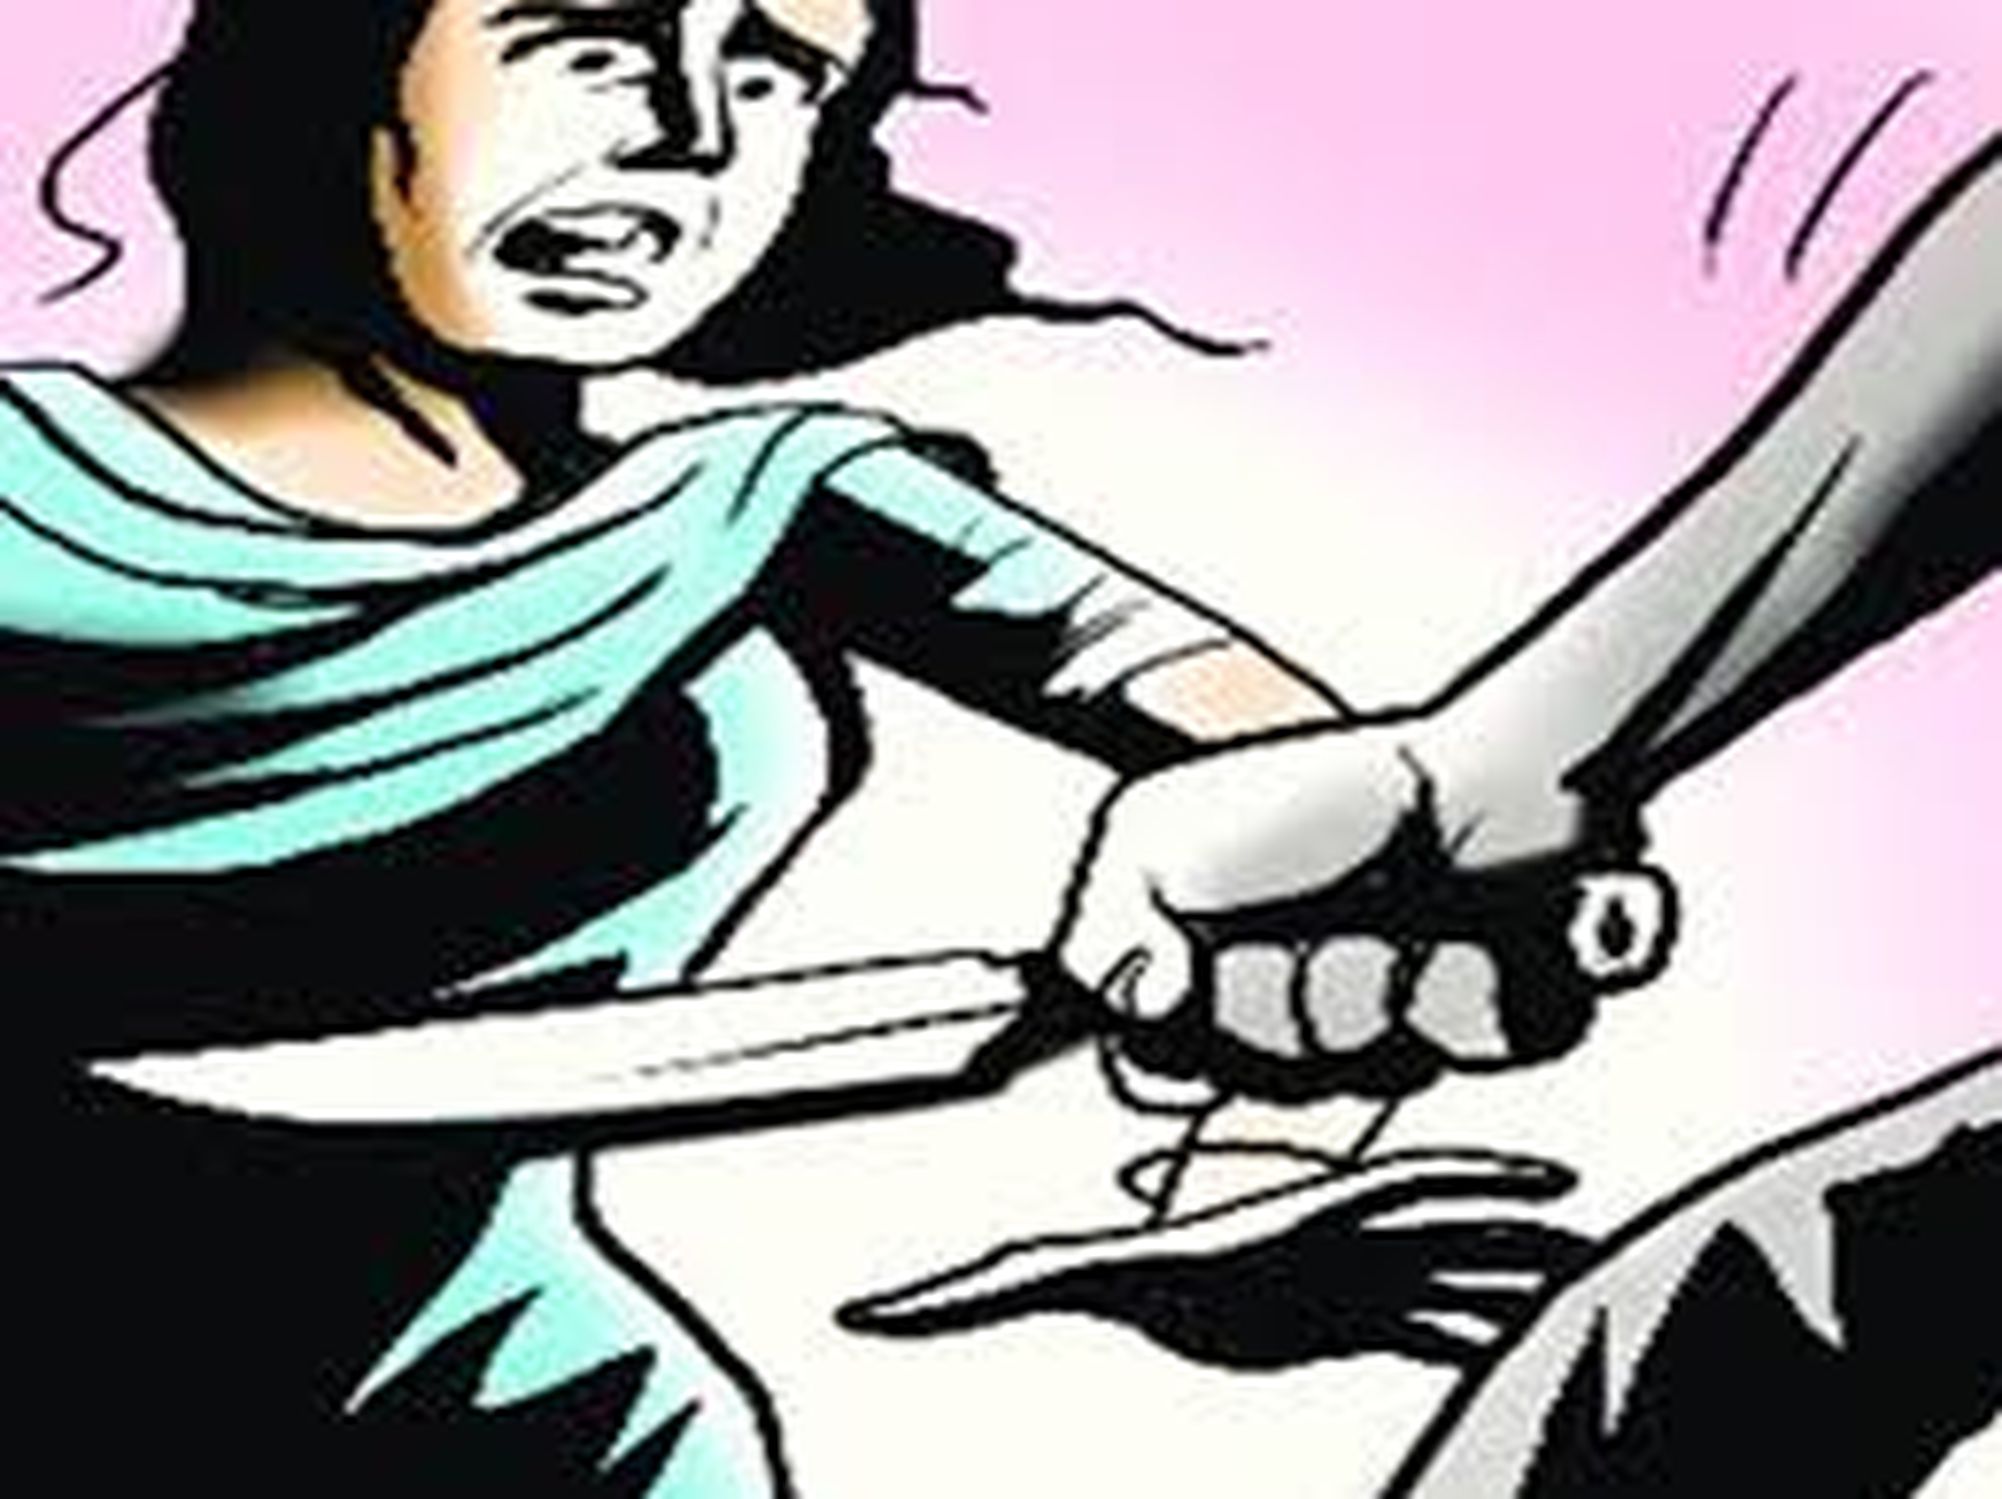  Unprotected daughters of Burhanpur, in 11 months 35 cases of rape, 12 more than last year